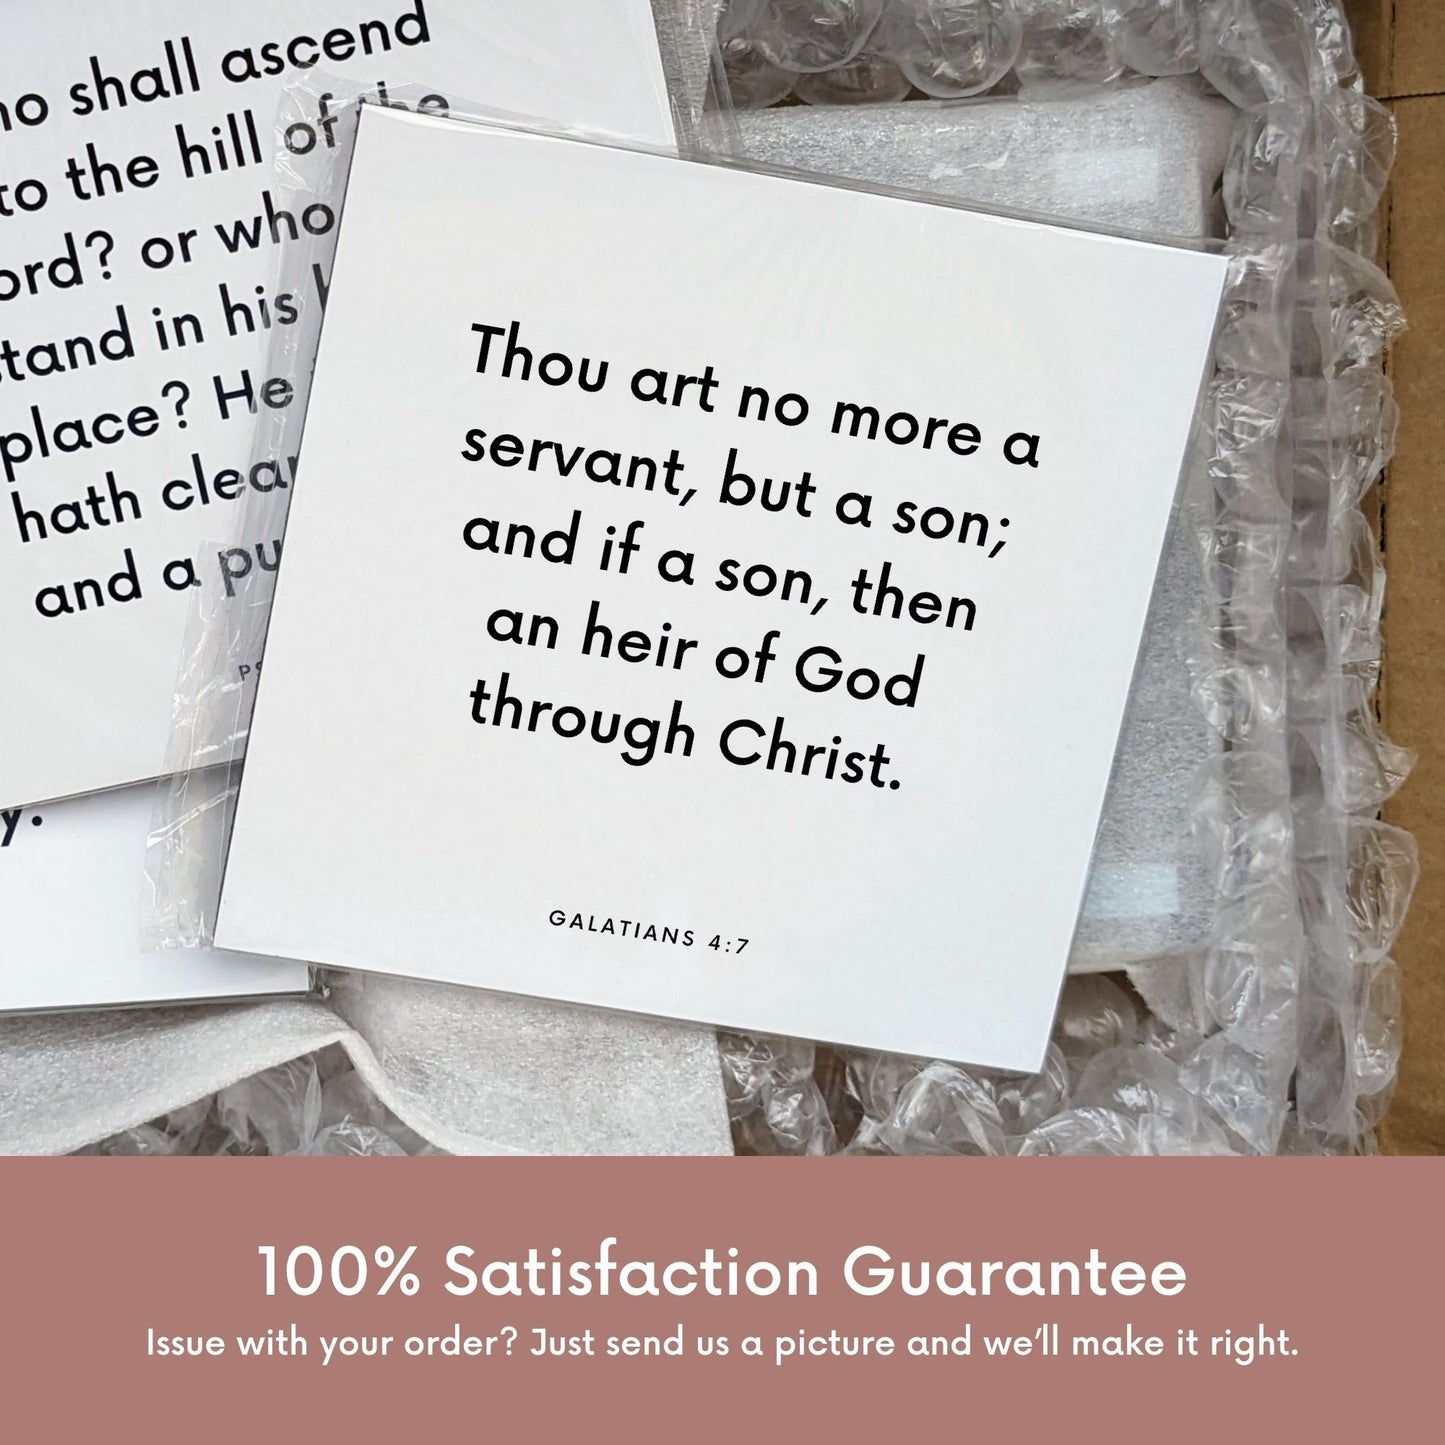 Shipping materials for scripture tile of Galatians 4:7 - "Thou art no more a servant, but a son"